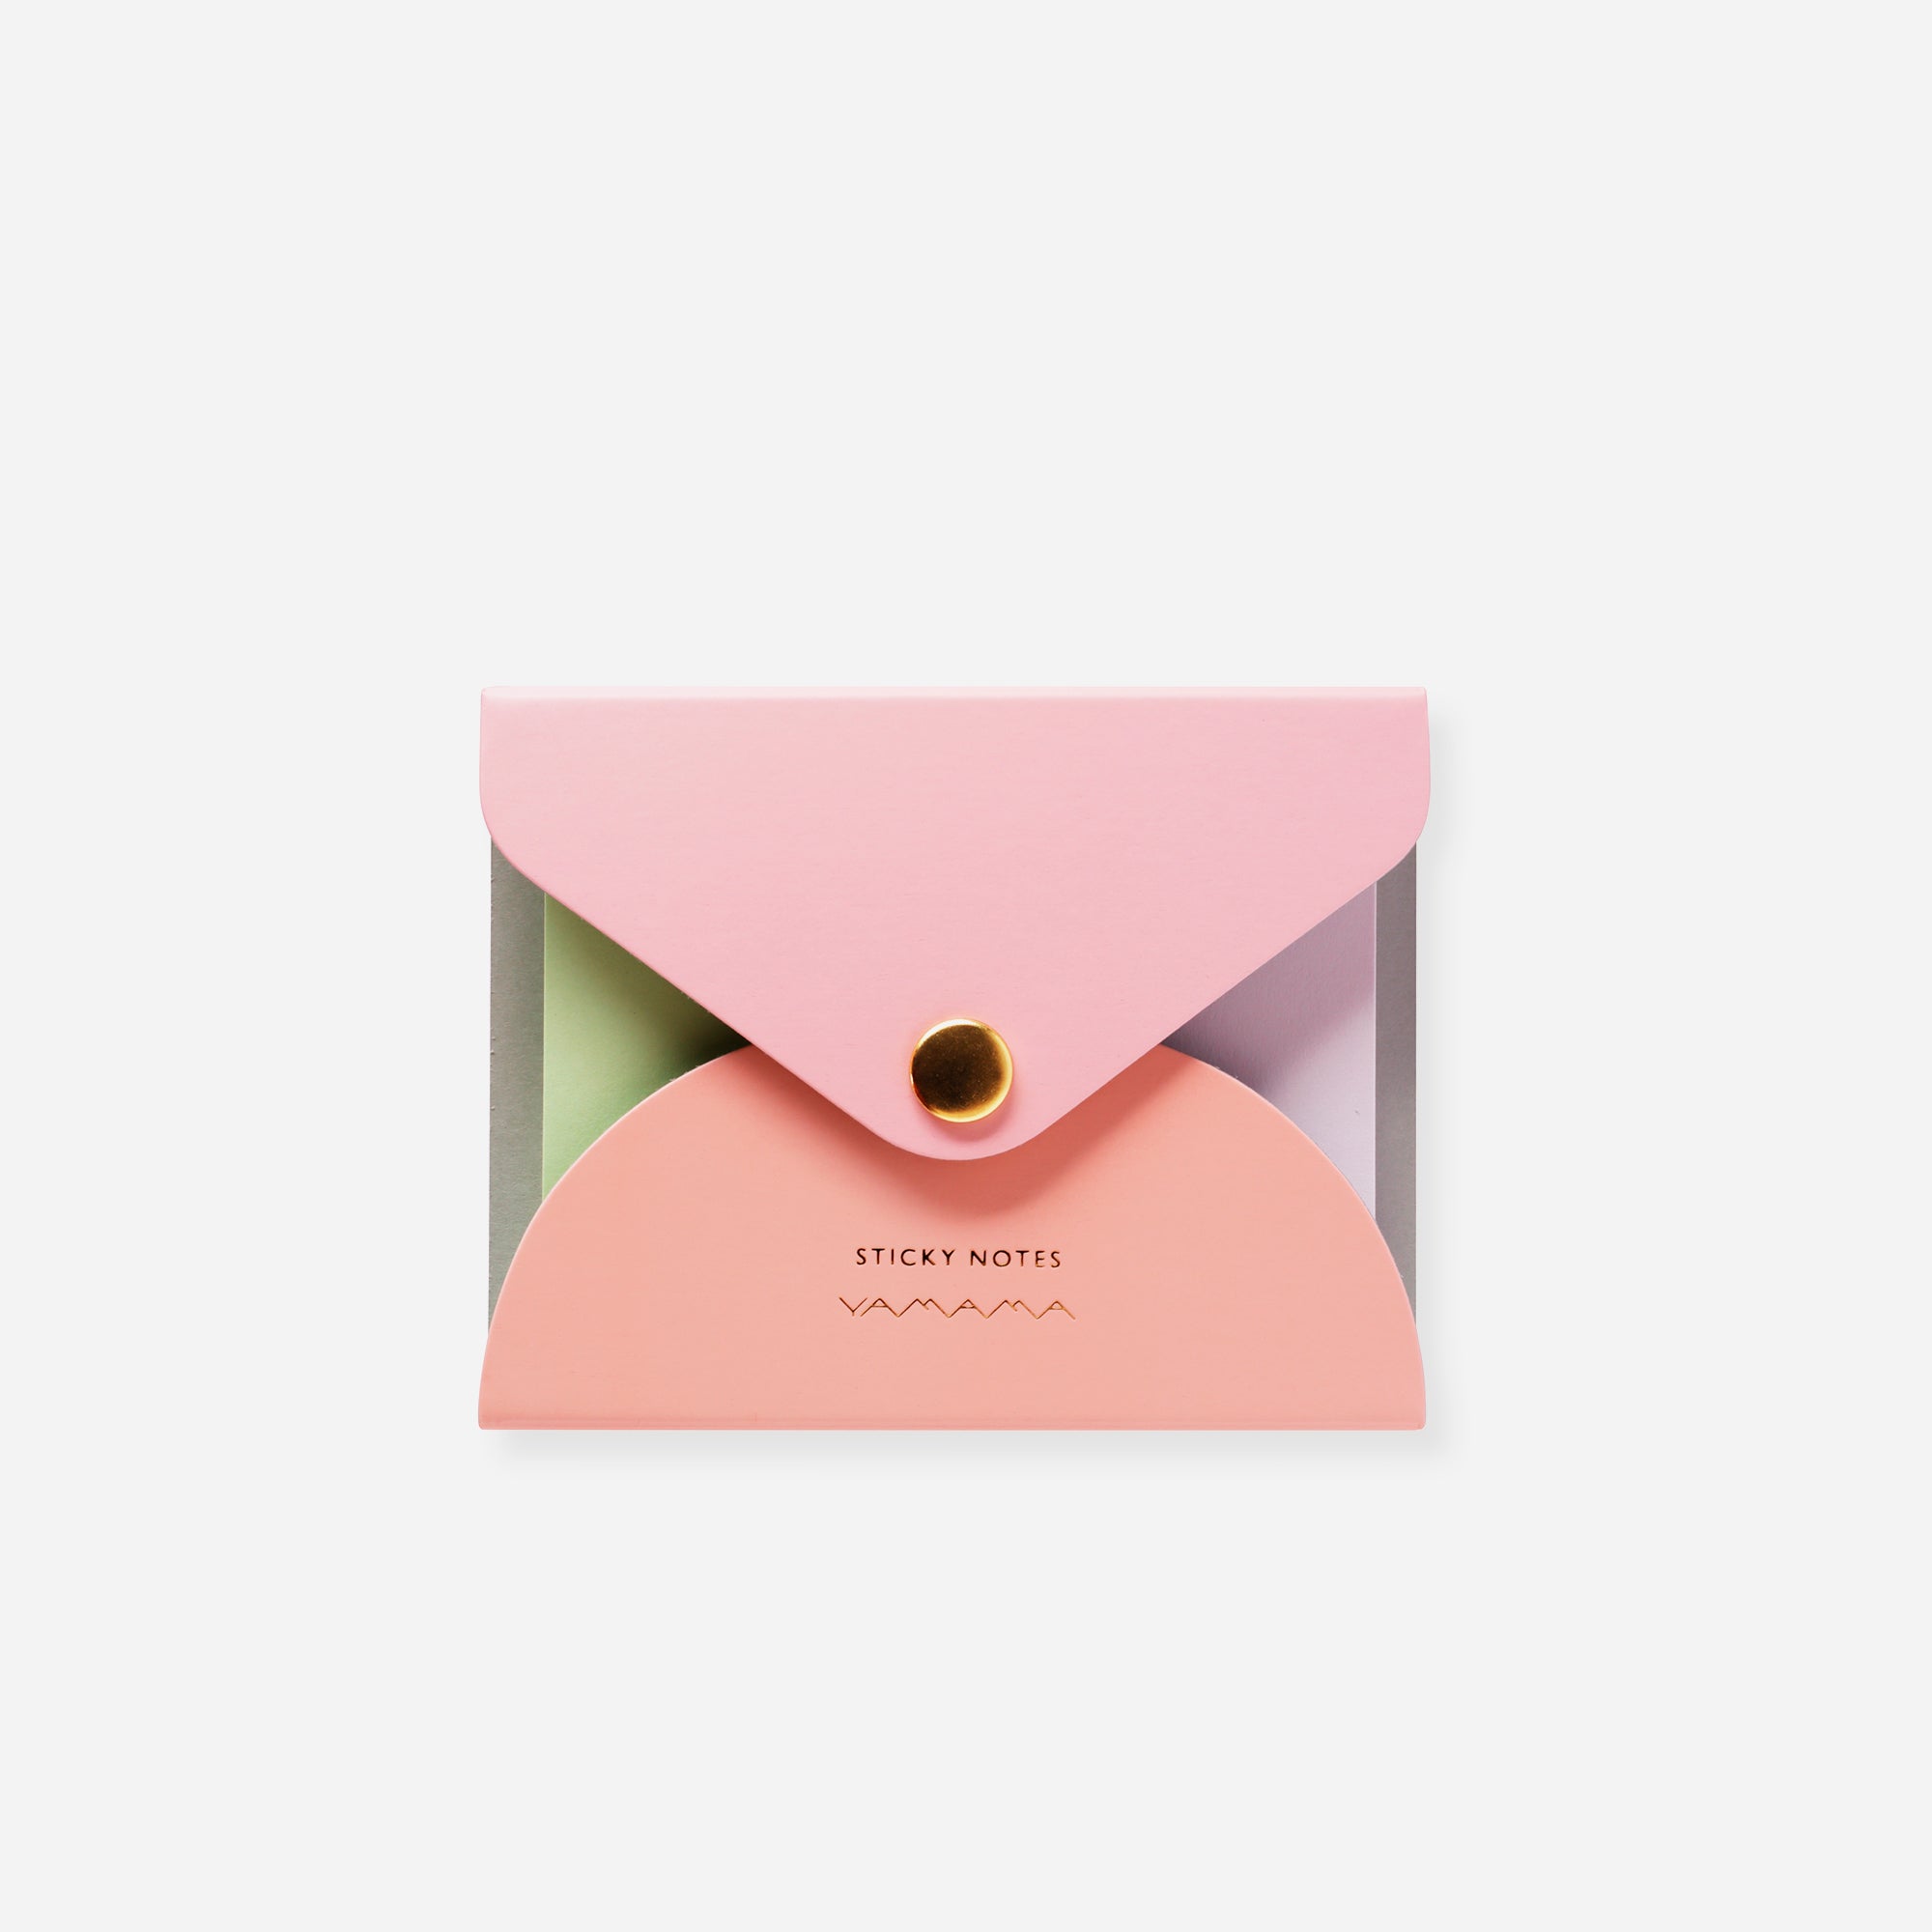 YAMAMA STICKY NOTES pink cover